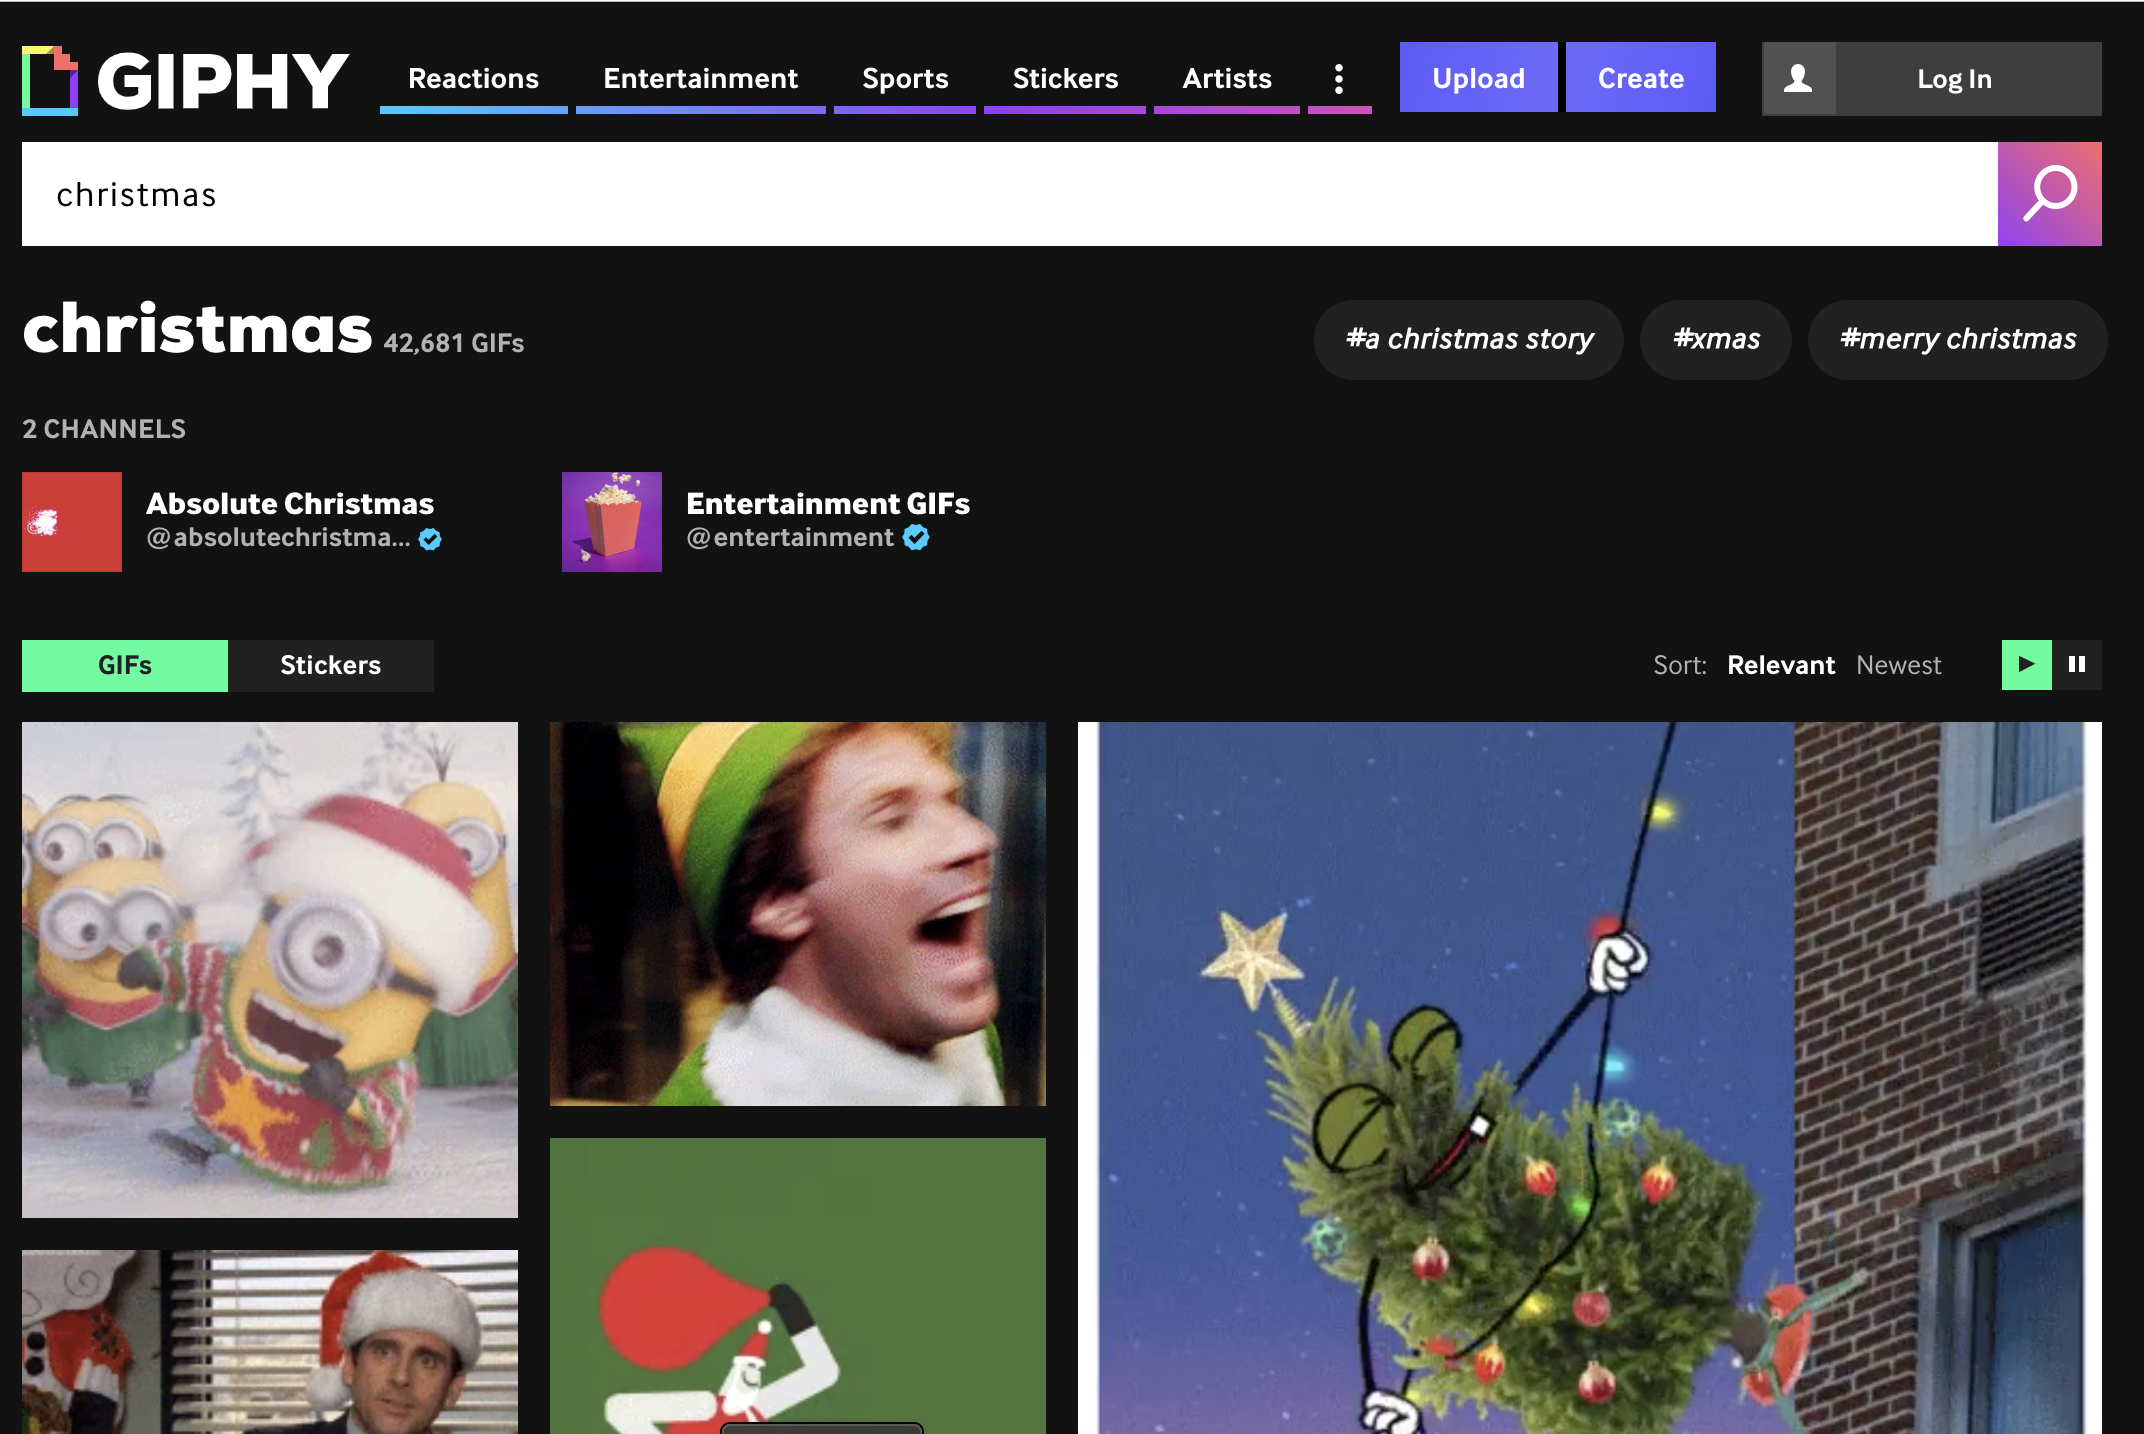 Giphy search for “christmas”